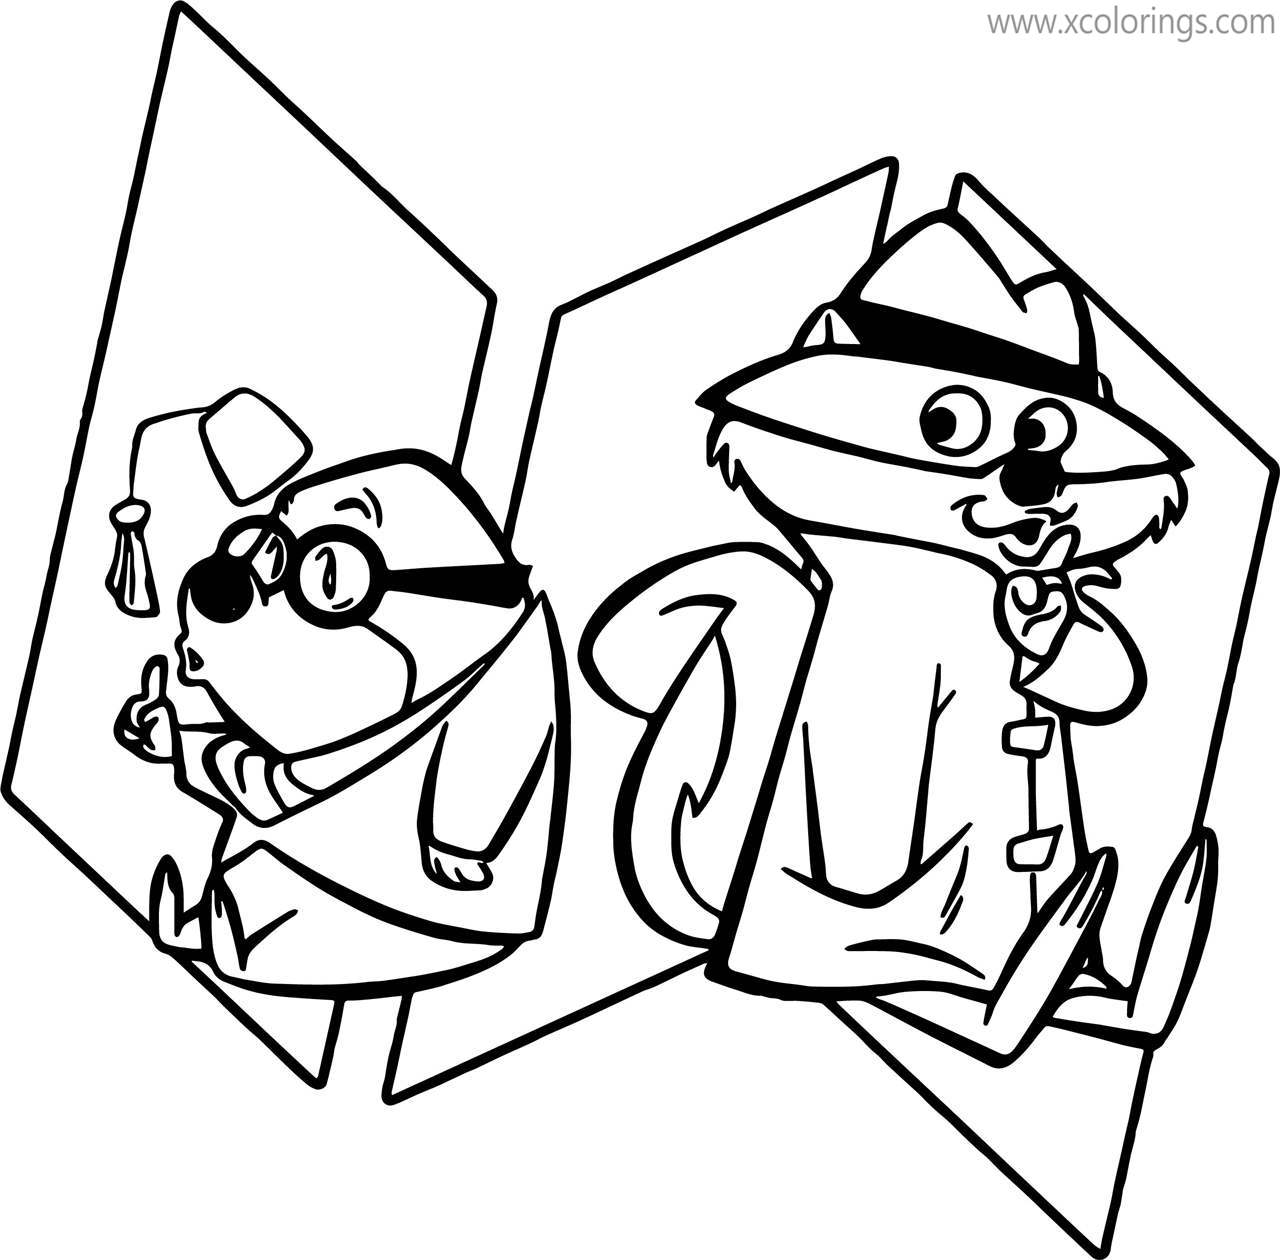 Free Secret Squirrel with Friend Coloring Pages printable